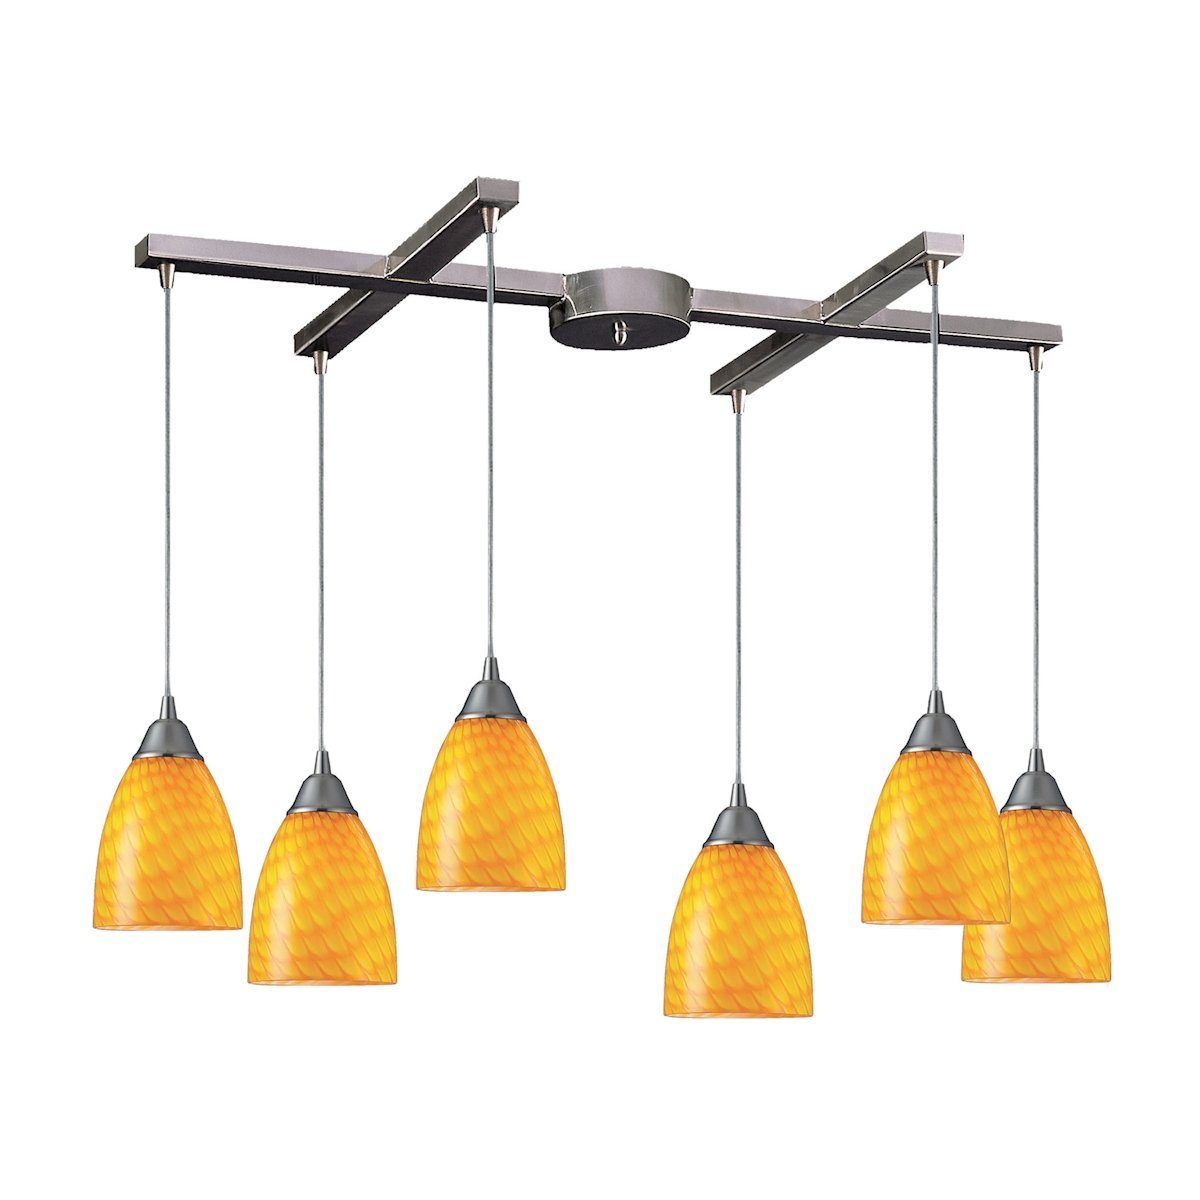 Arco Baleno 6 Light Pendant In Satin Nickel And Canary Glass Ceiling Elk Lighting 